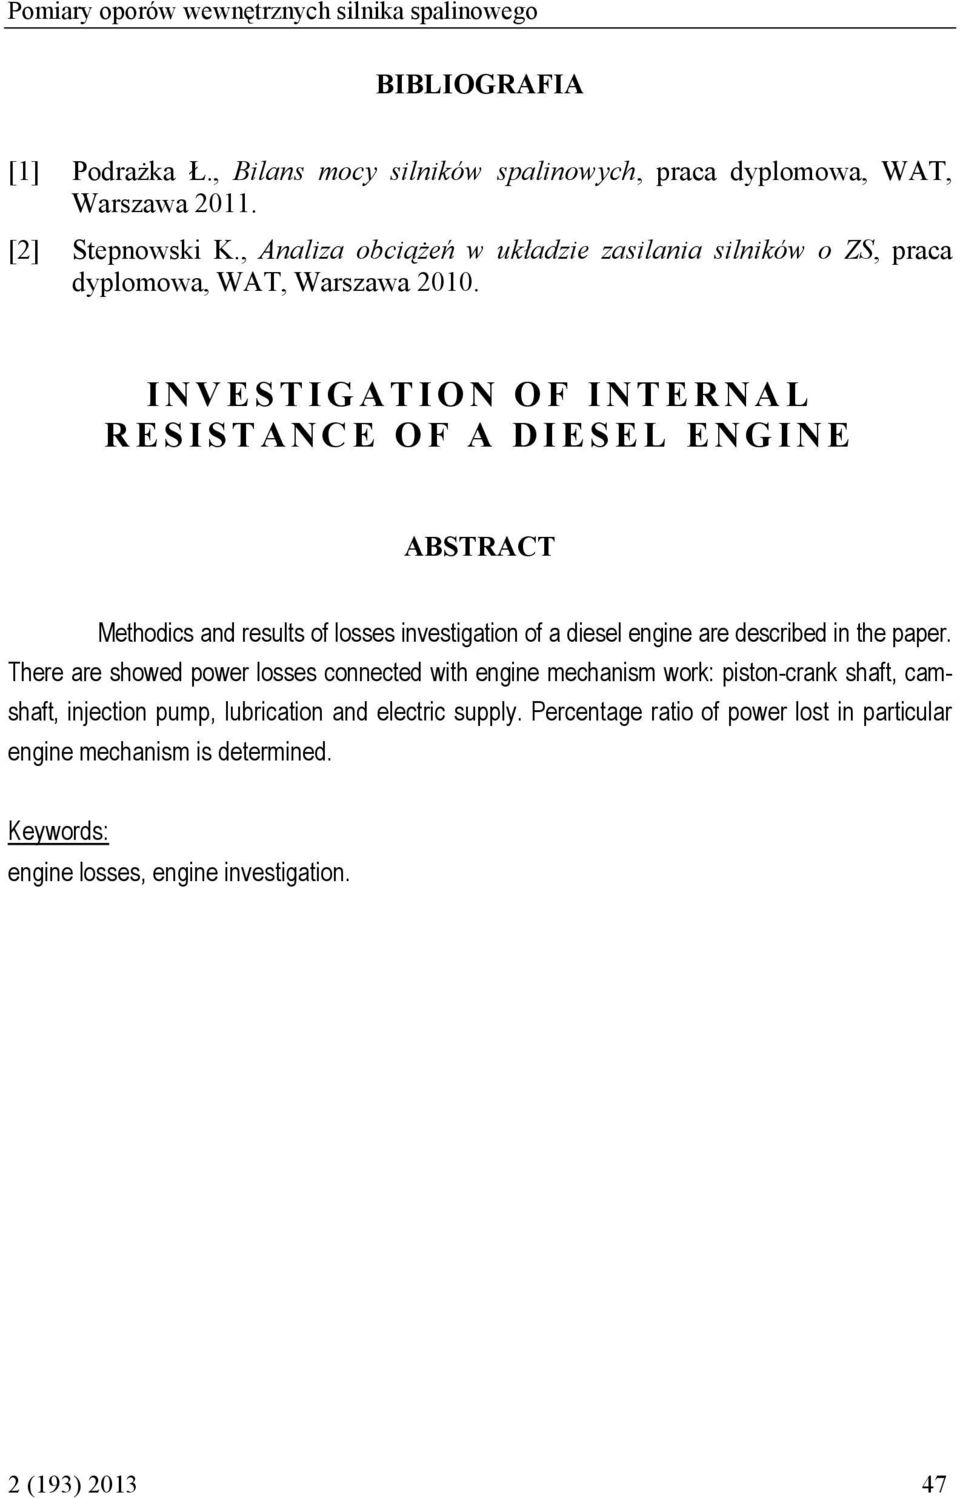 INVESTIGATION OF INTERNAL RESISTANCE OF A DIESEL ENGINE ABSTRACT Methodics and results of losses investigation of a diesel engine are described in the paper.